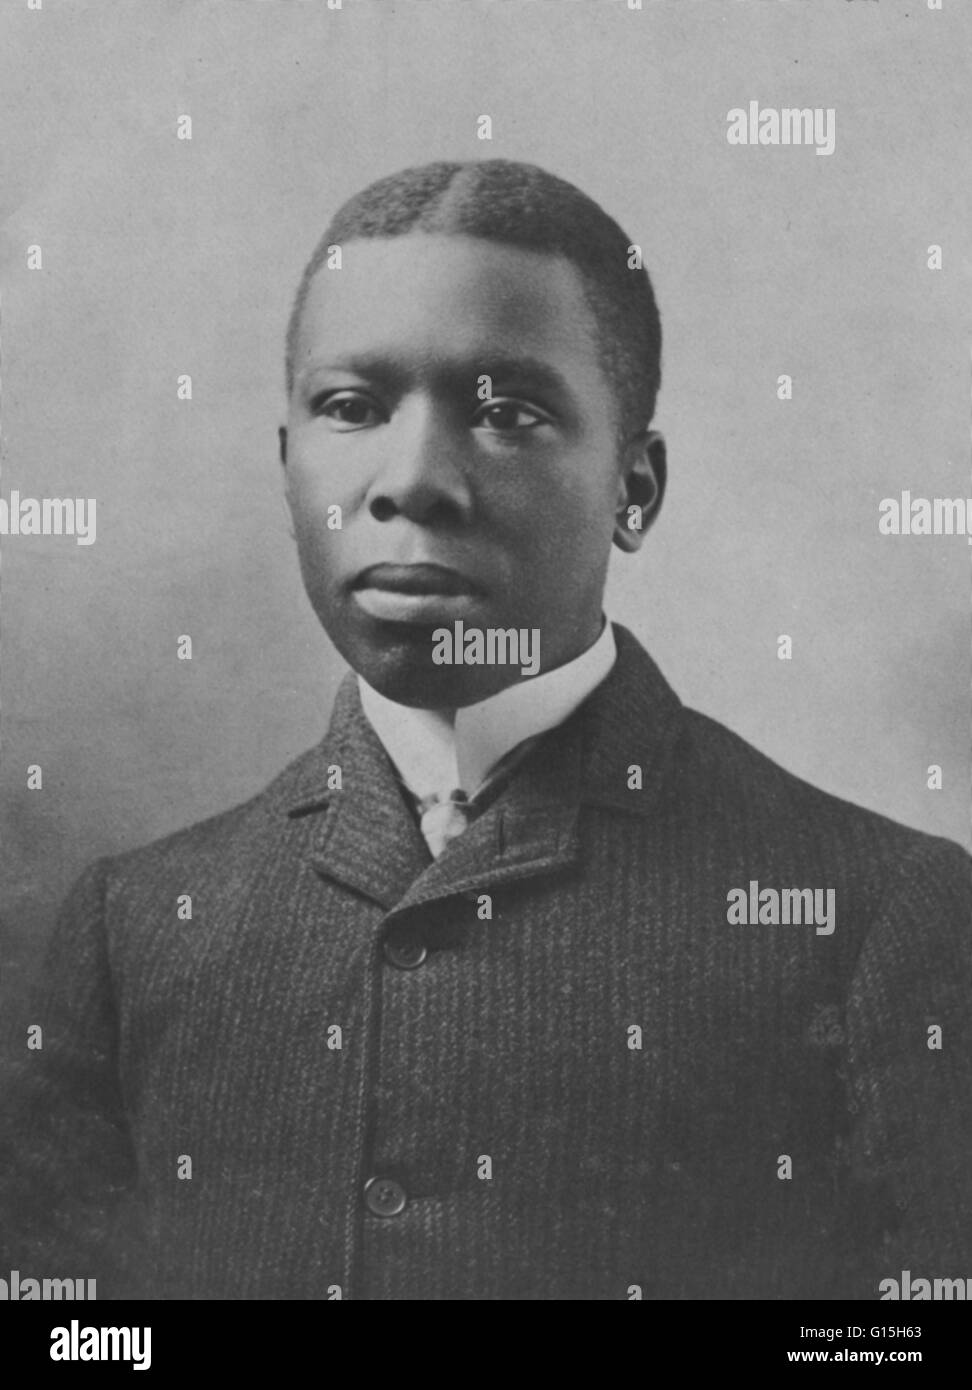 Paul Laurence Dunbar (1872-1906) was an African American poet, novelist, and playwright. Much of his popular work in his lifetime used a Negro dialect, which helped him become one of the first nationally-accepted African American writers. His more traditi Stock Photo